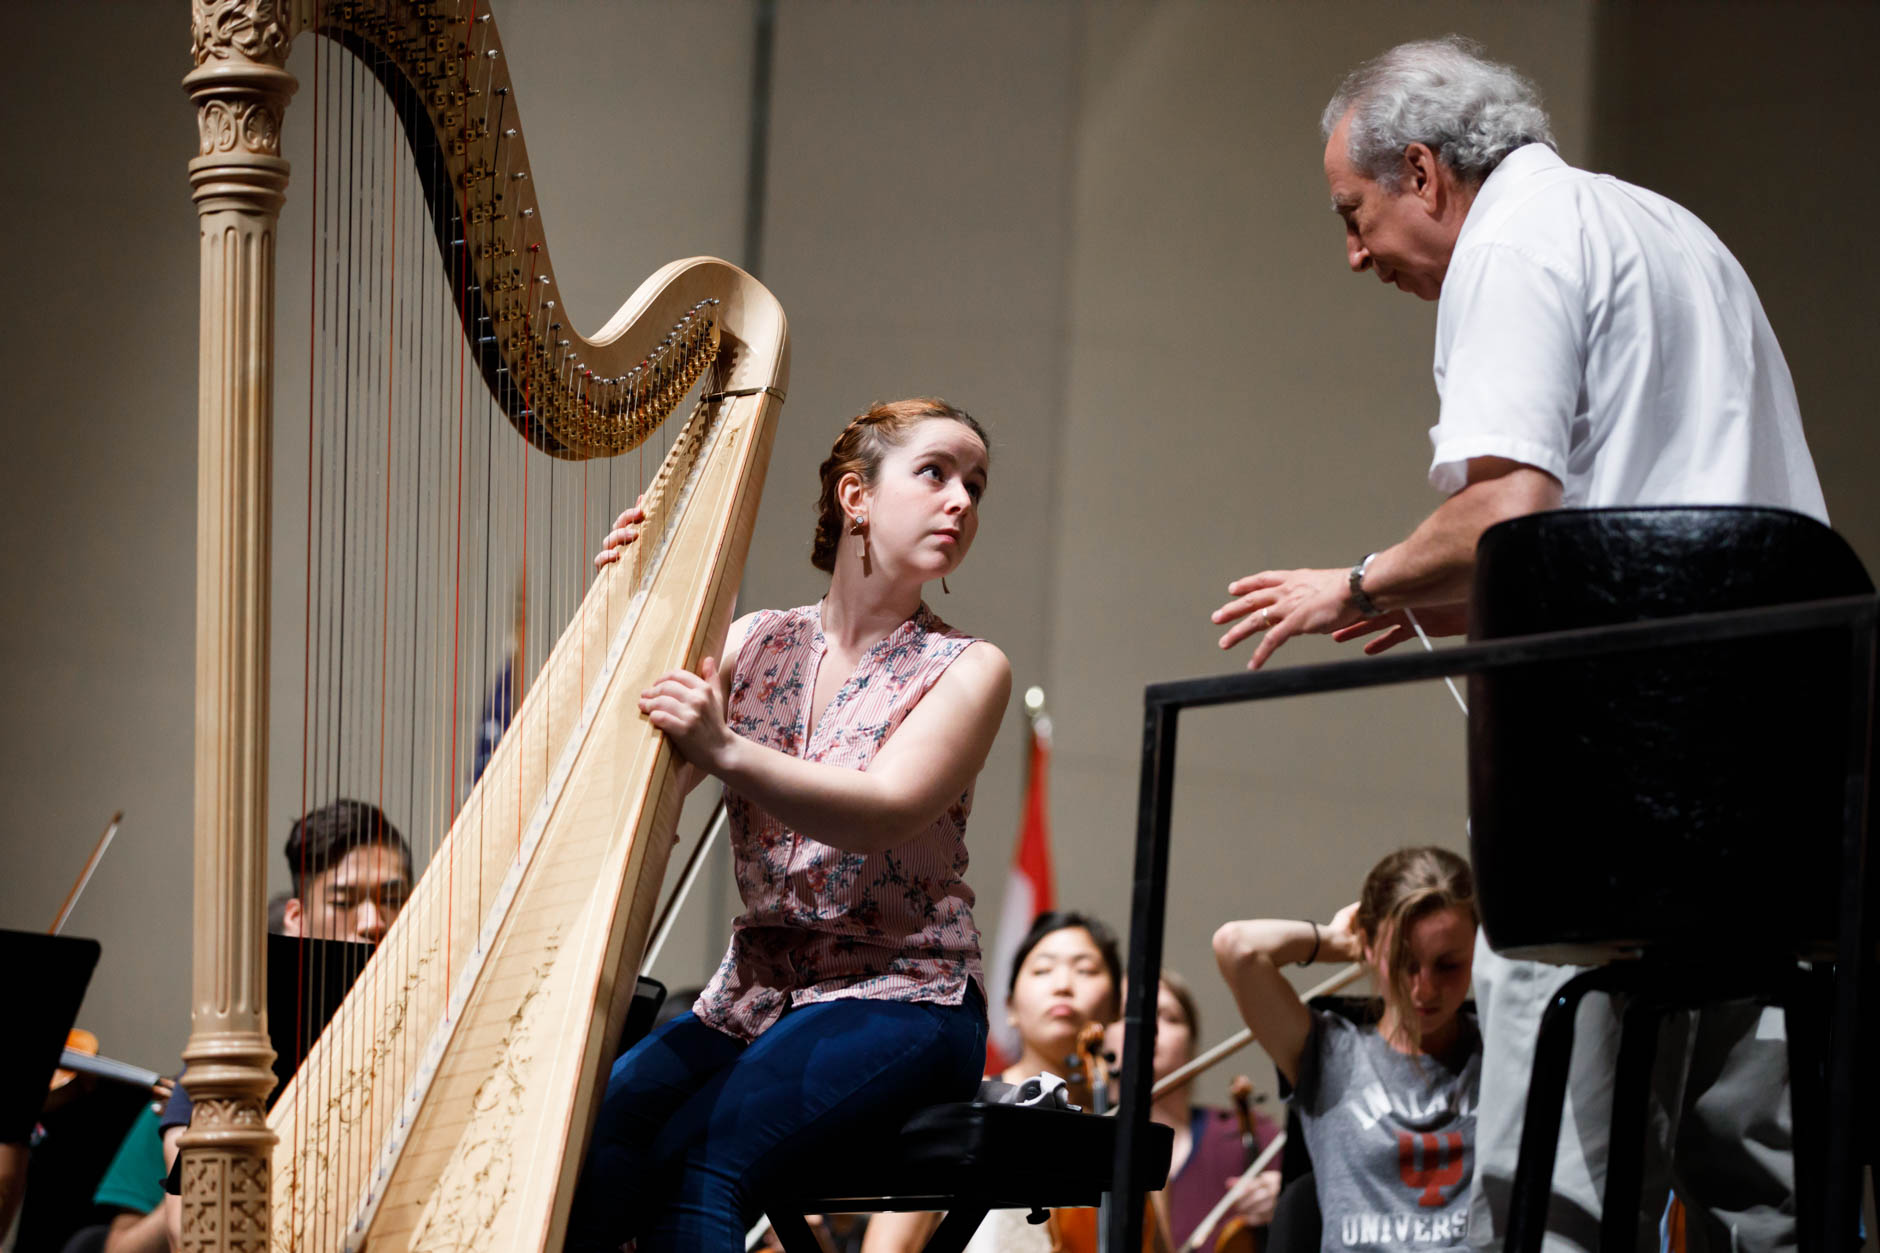 Melanie Laurent from France speaks with conductor Arthur Fagen during an orchestra rehearsal for the Final Stage concert at the 11th USA International Harp Competition at Indiana University in Bloomington, Indiana on Friday, July 12, 2019. (Photo by James Brosher)